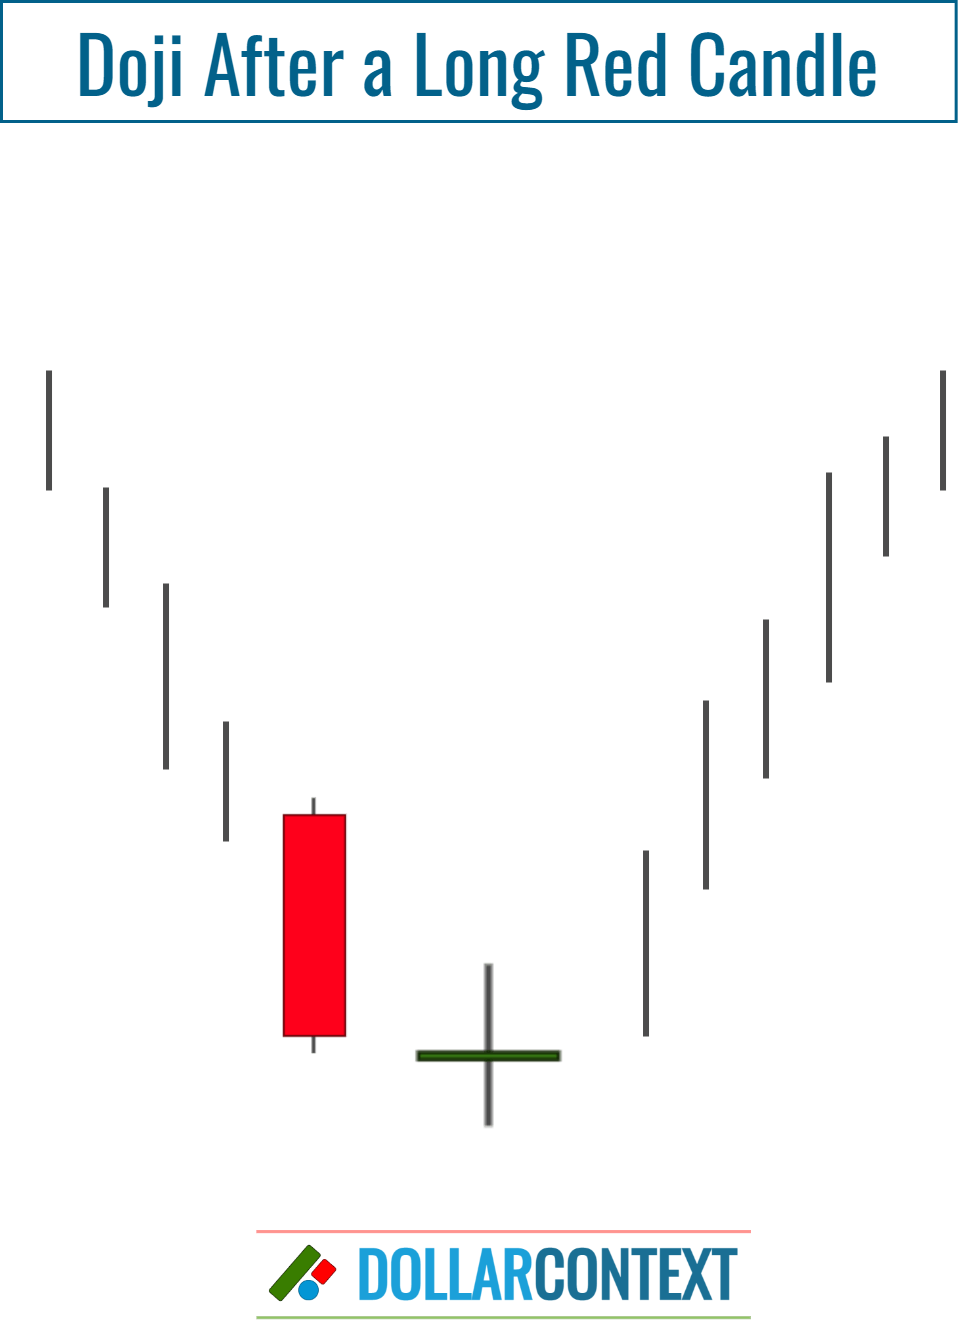 Doji After a Long Red (or Black) Body